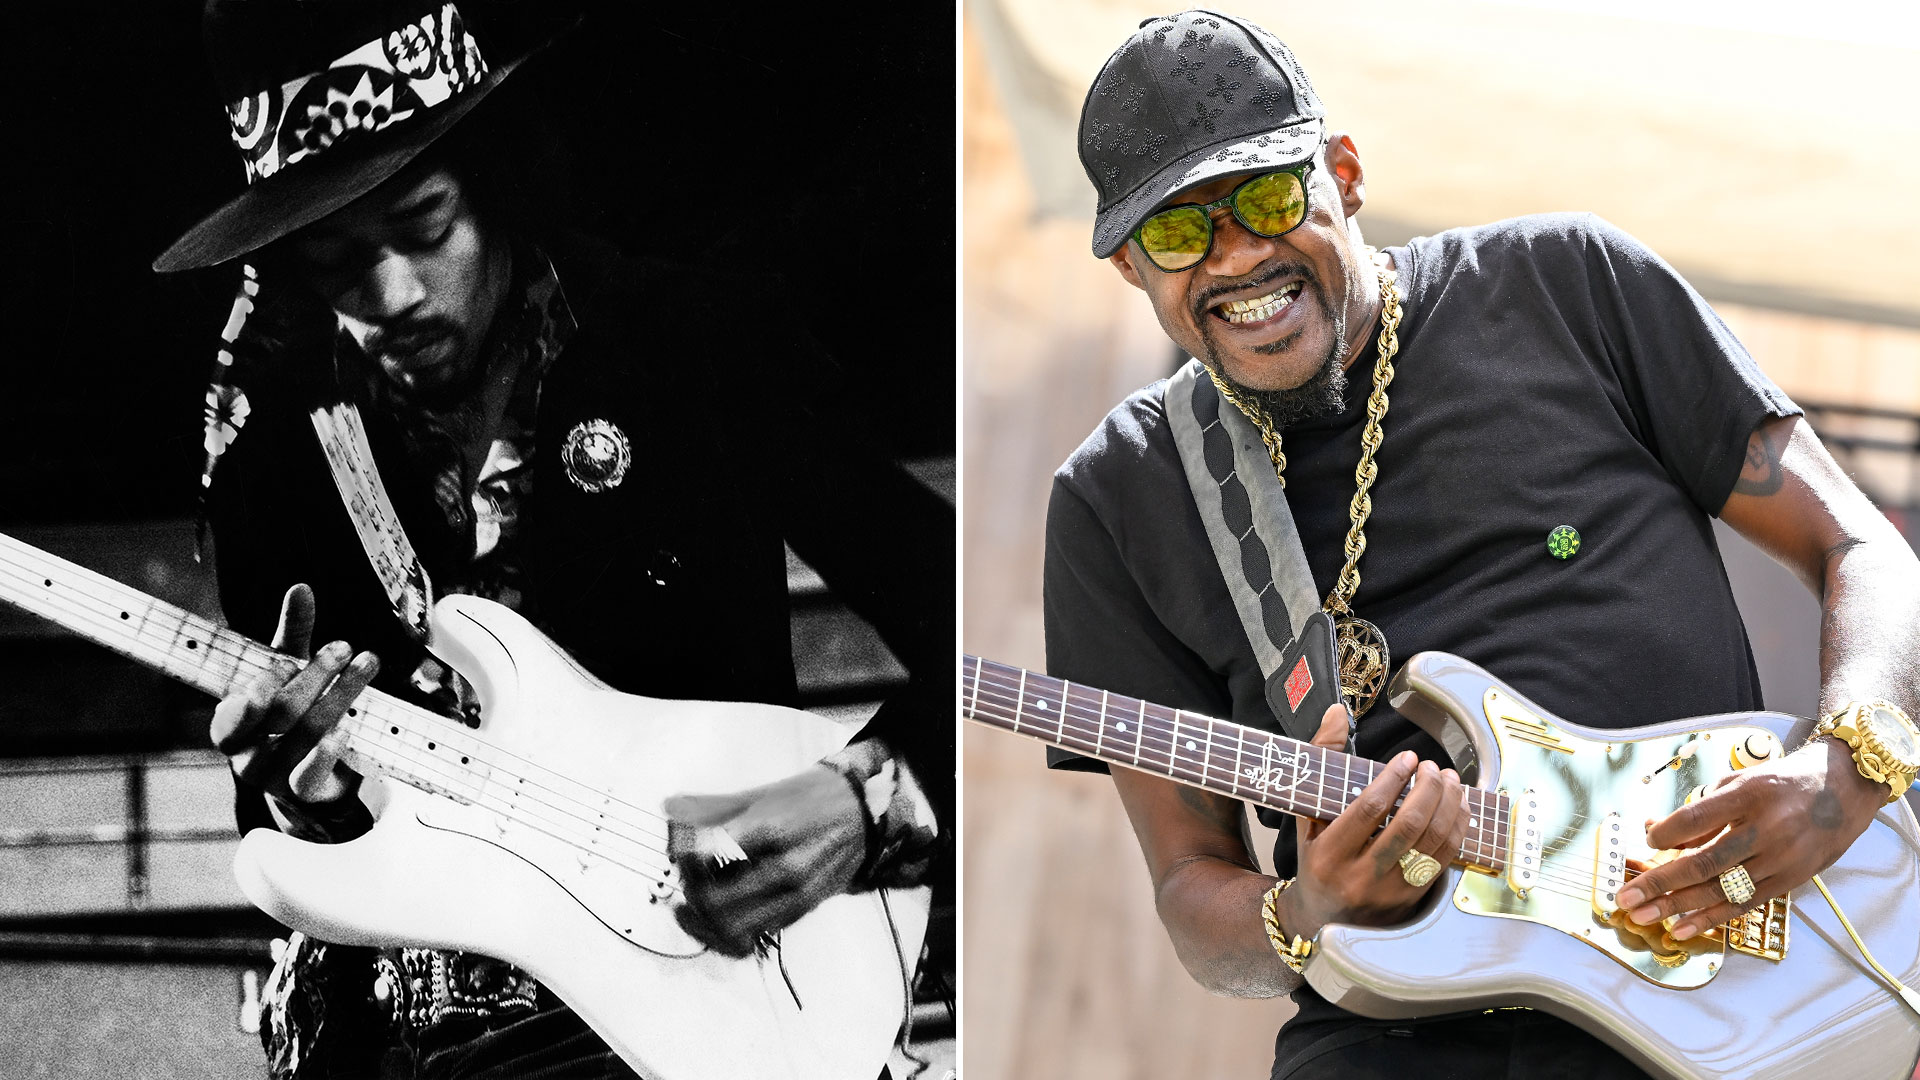 “A lot of kids think drop-tuning is this new thing that just came out and it’s like, ‘No way, Jimi Hendrix was doing that stuff a long time ago!’” Eric Gales on the lasting influence and innovations of the ultimate electric guitar icon